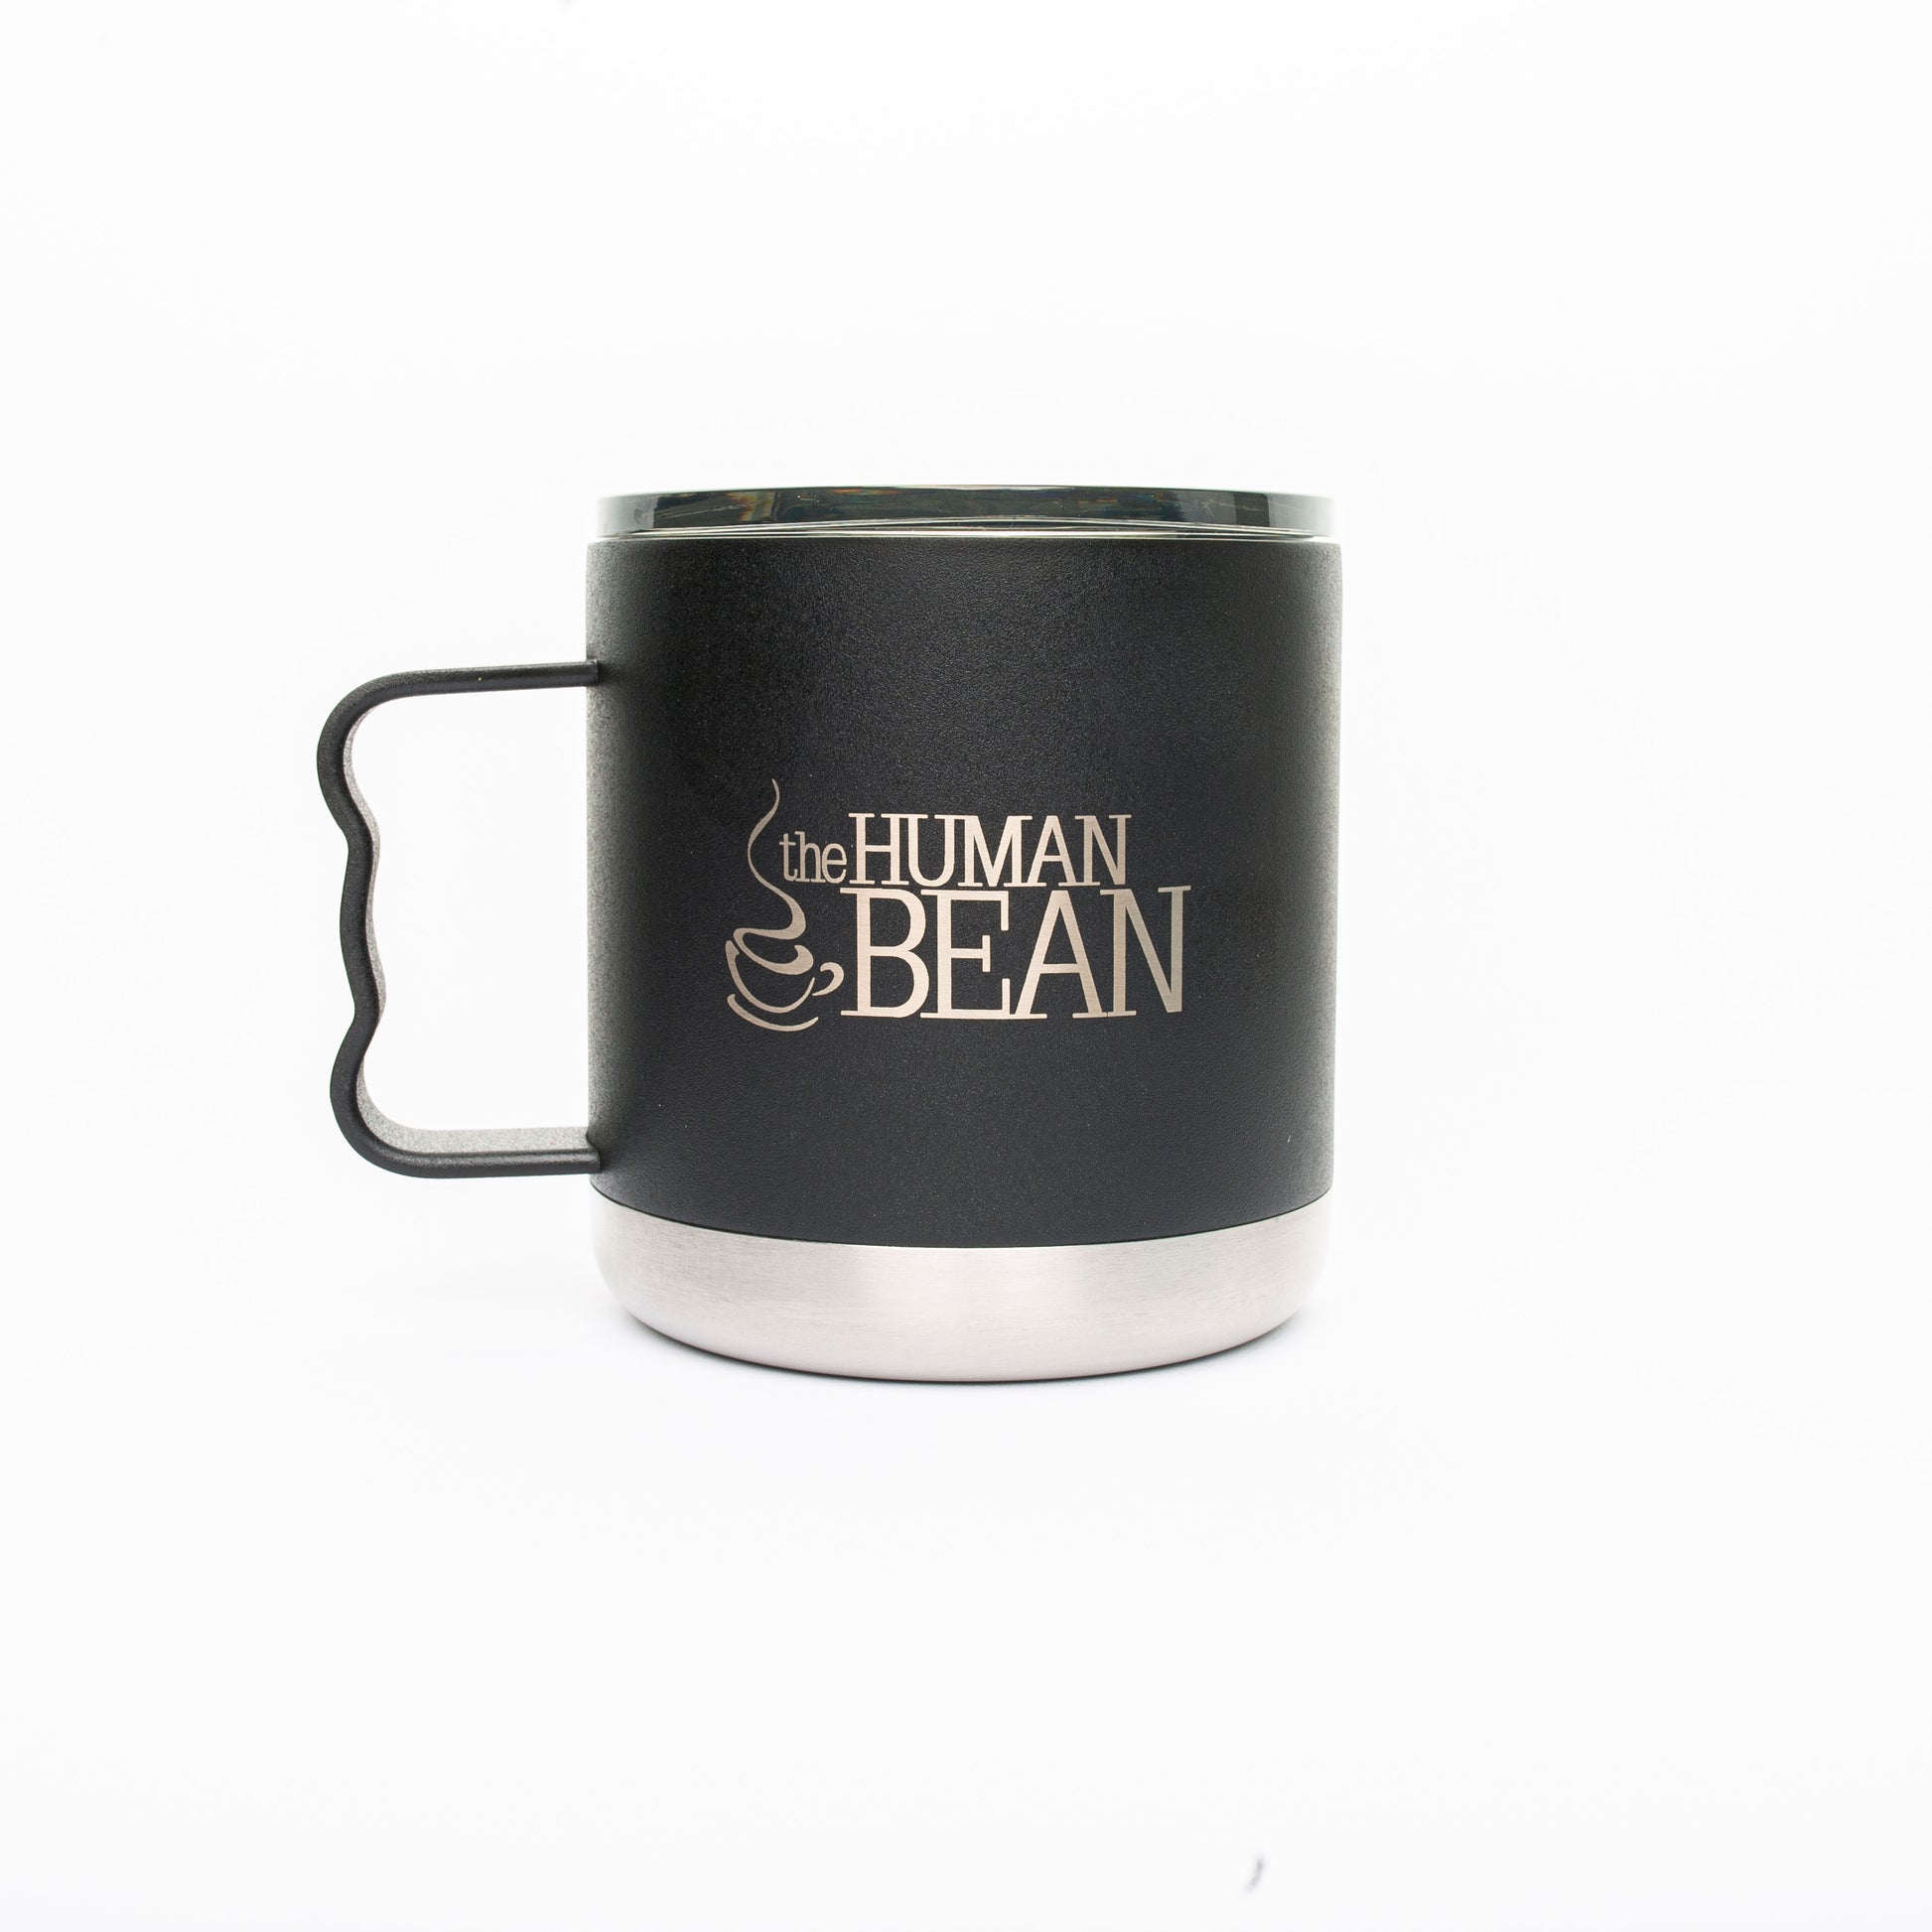 15oz Camp Mug with Slide Lid - FIFTY/FIFTY®– FIFTY/FIFTY Bottles